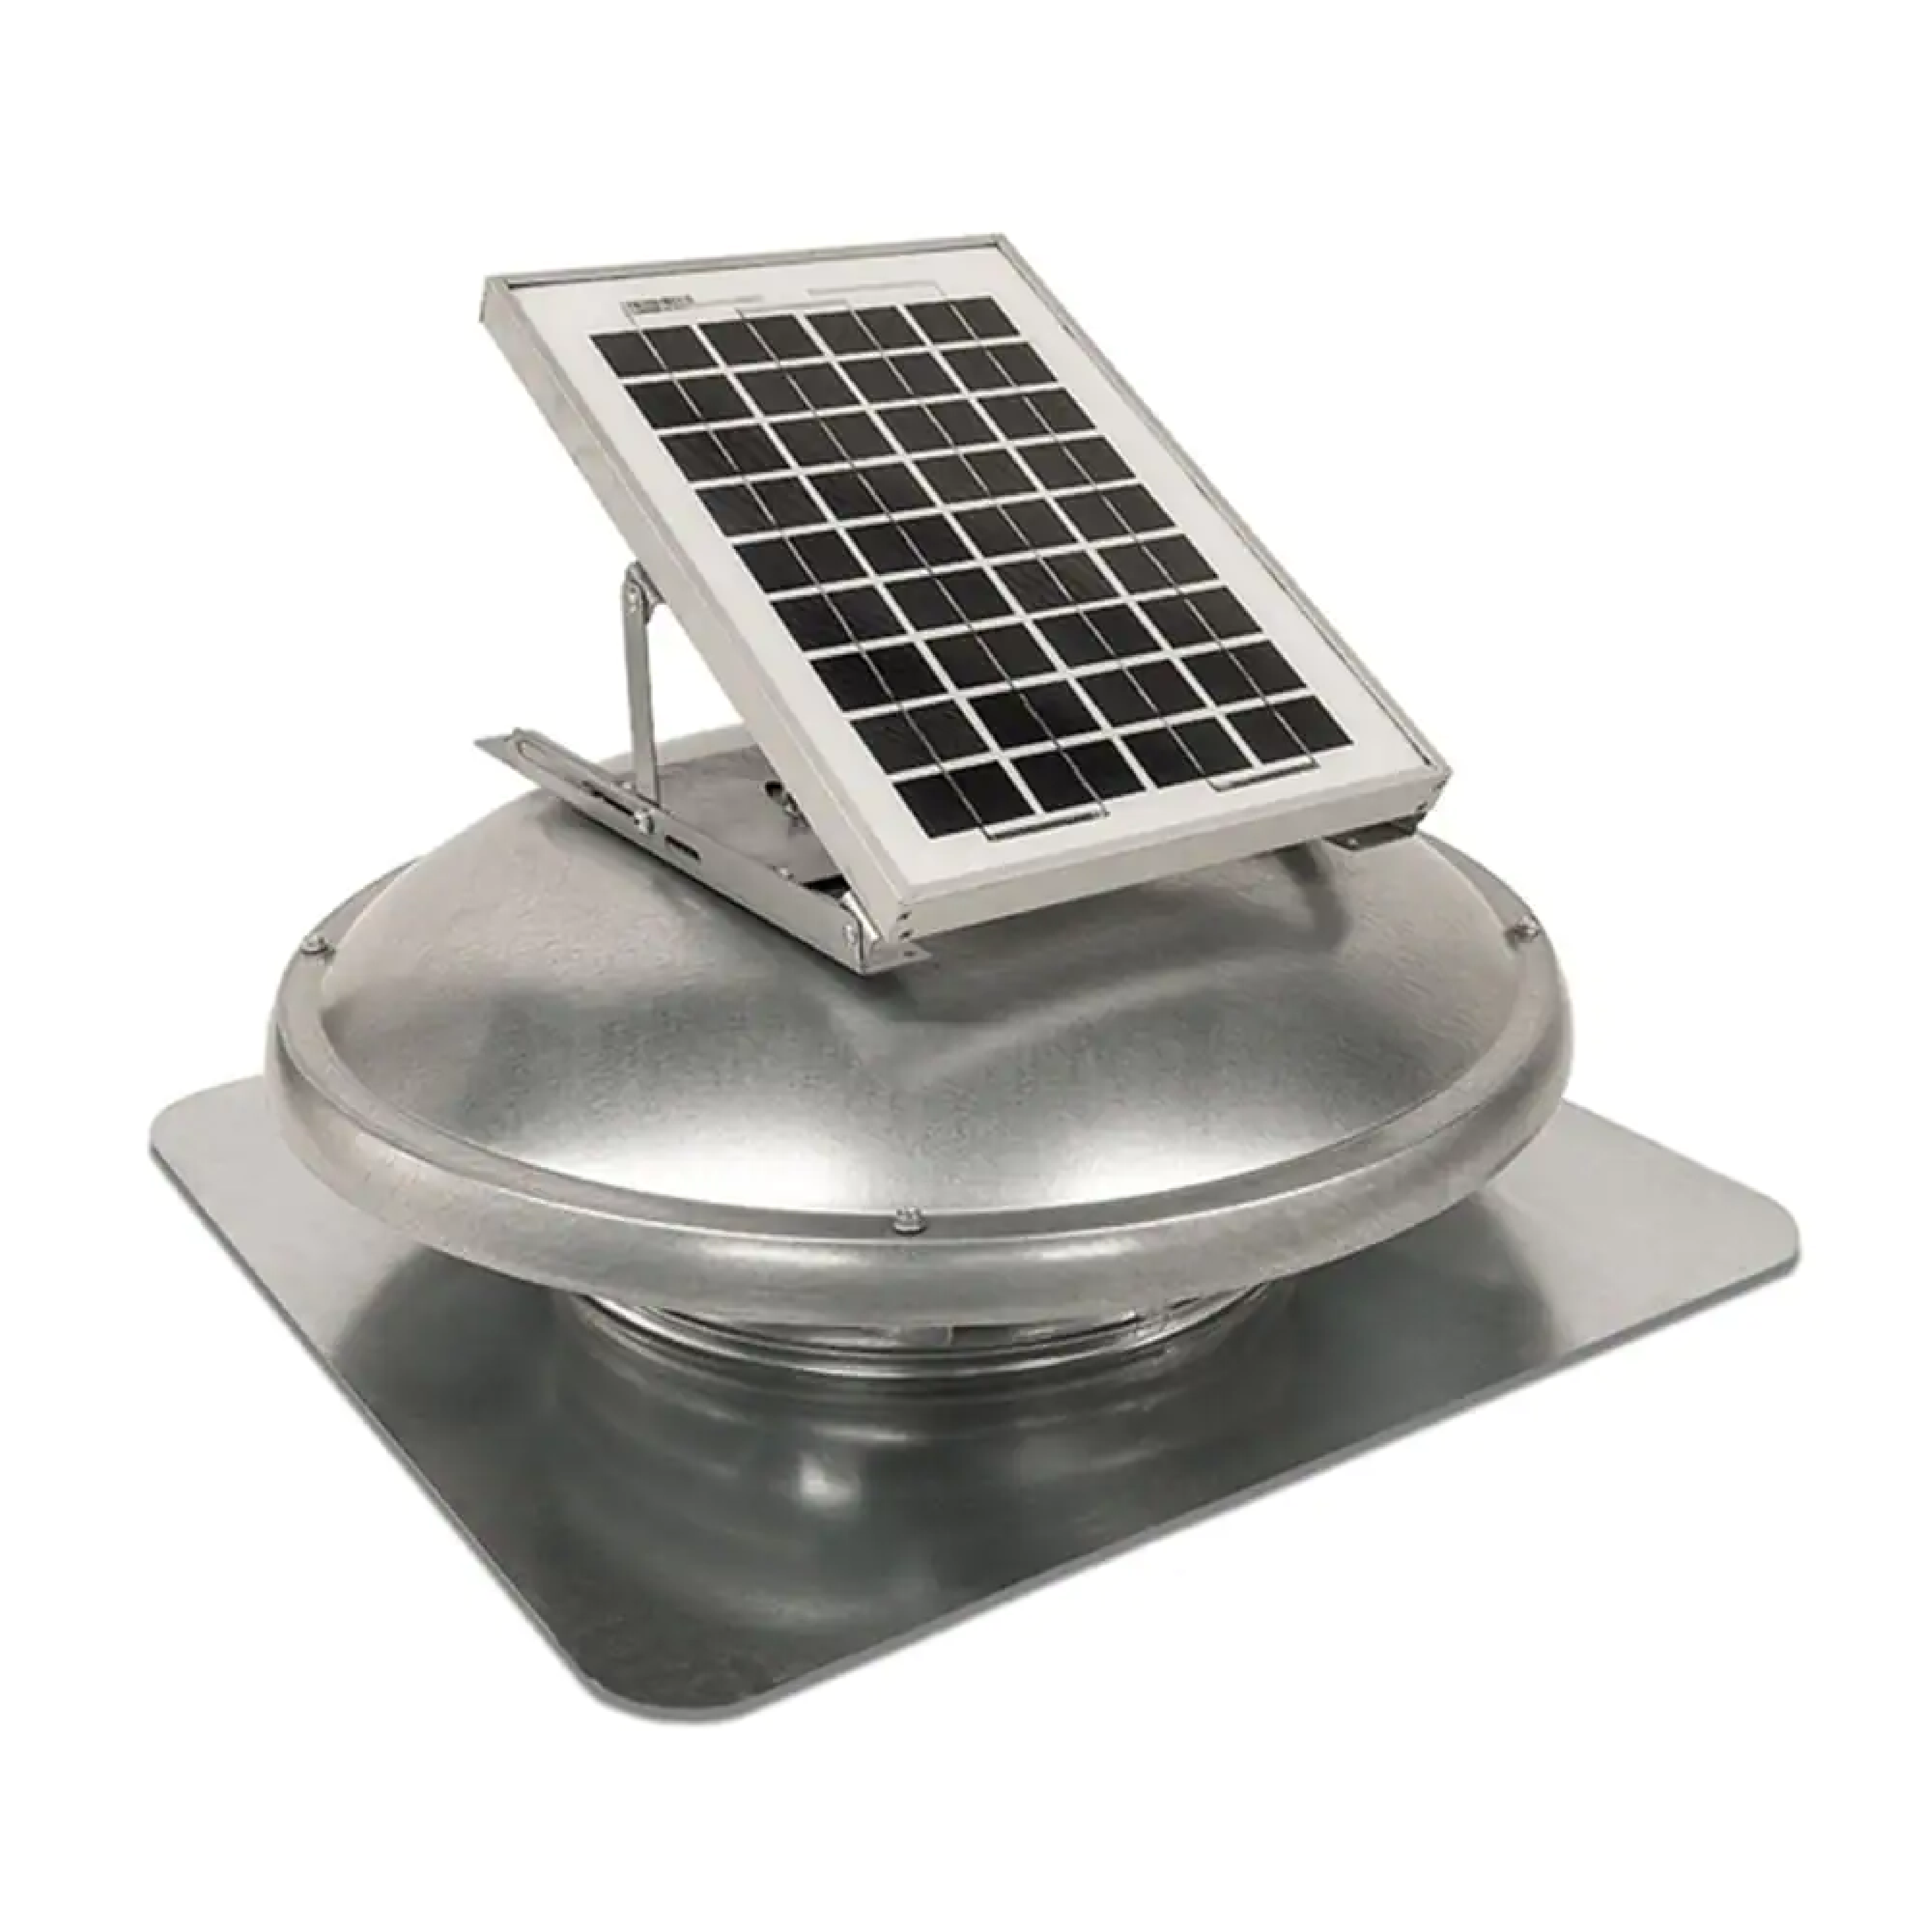 Image of a solar powered roof vent